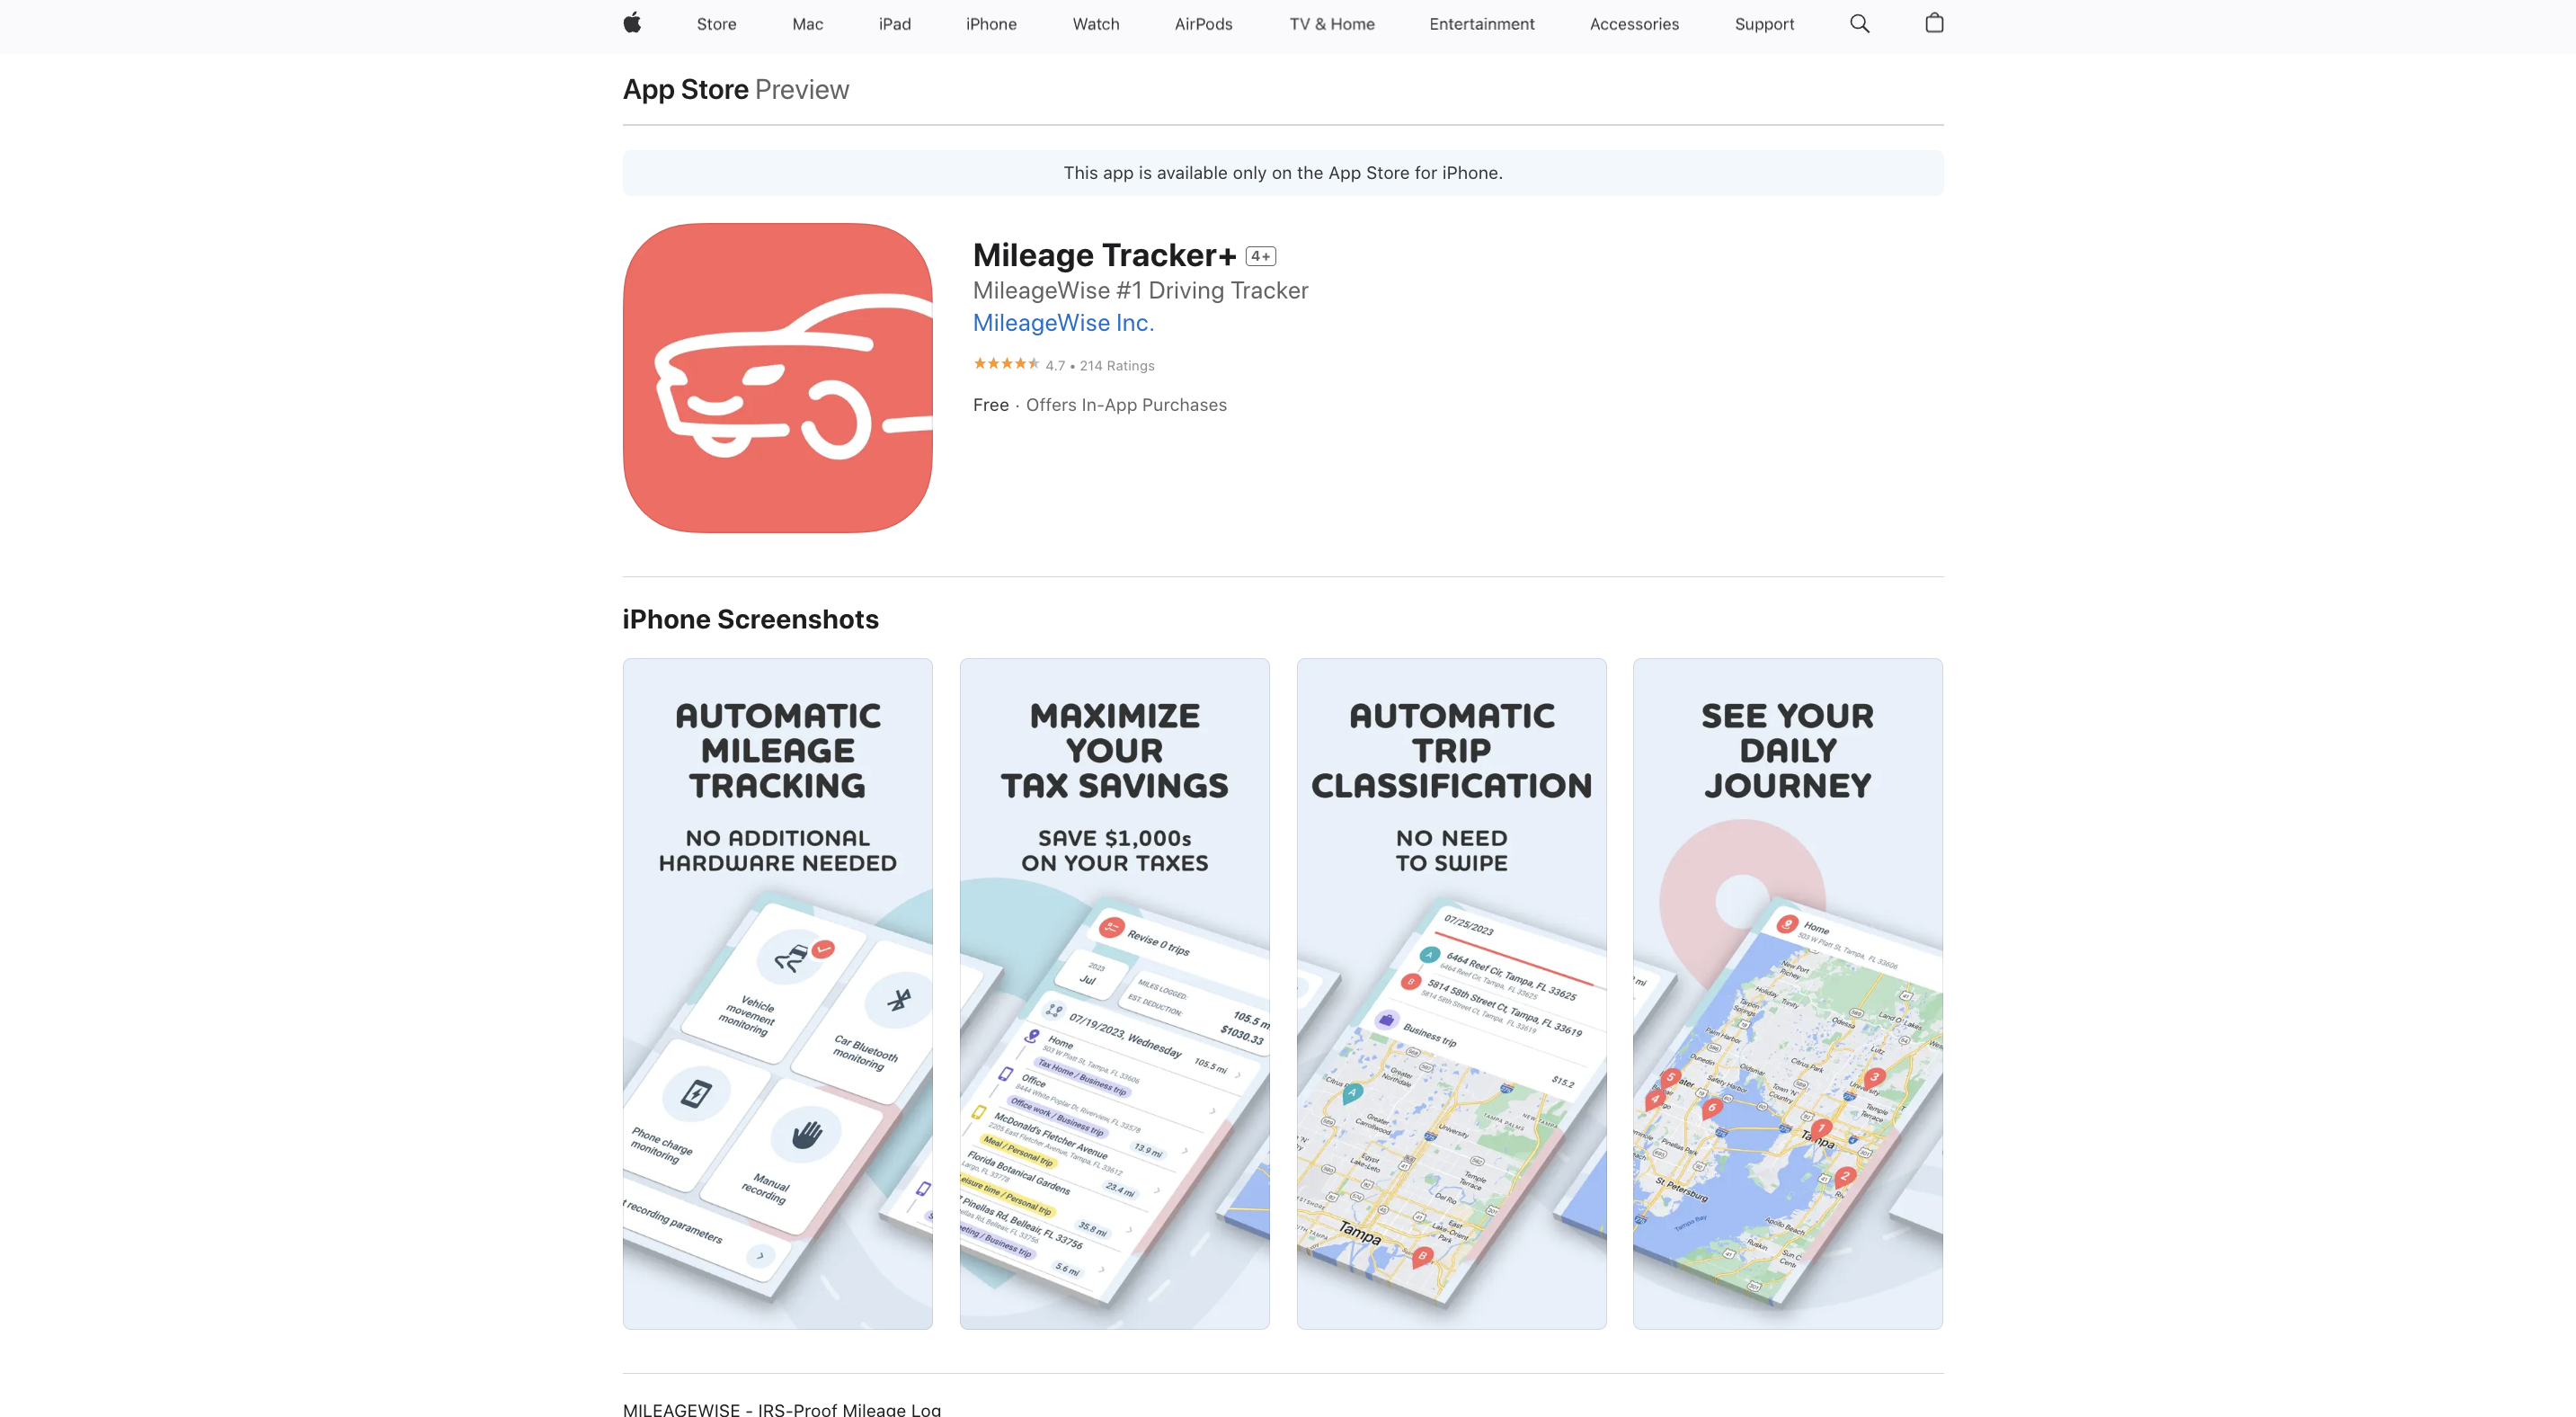 mileagewise on app store